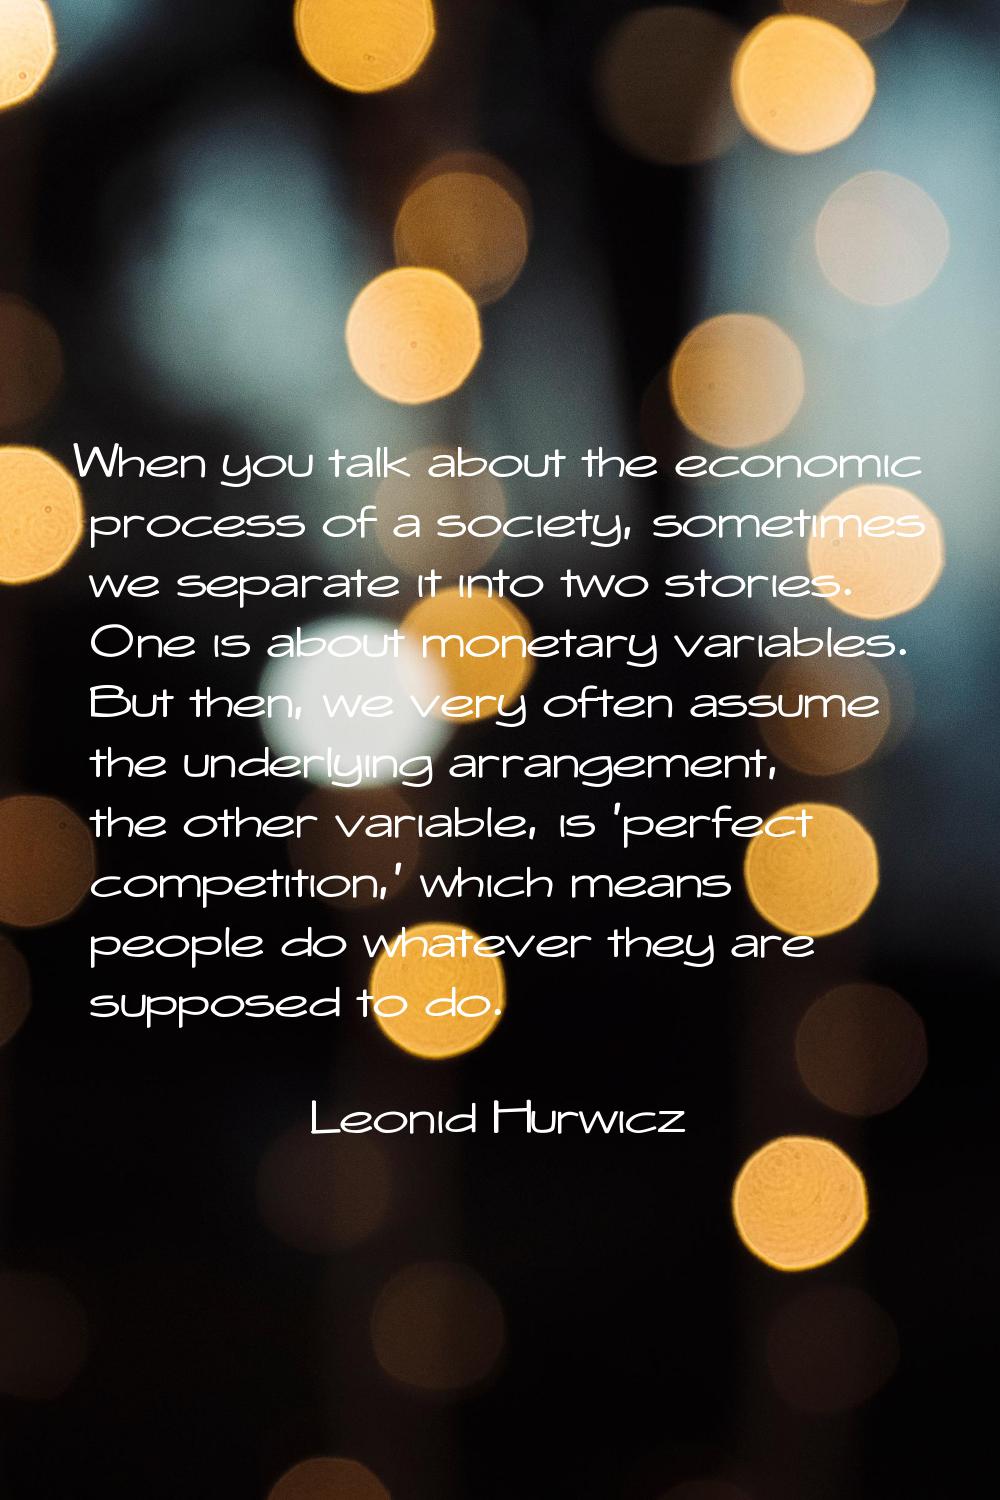 When you talk about the economic process of a society, sometimes we separate it into two stories. O